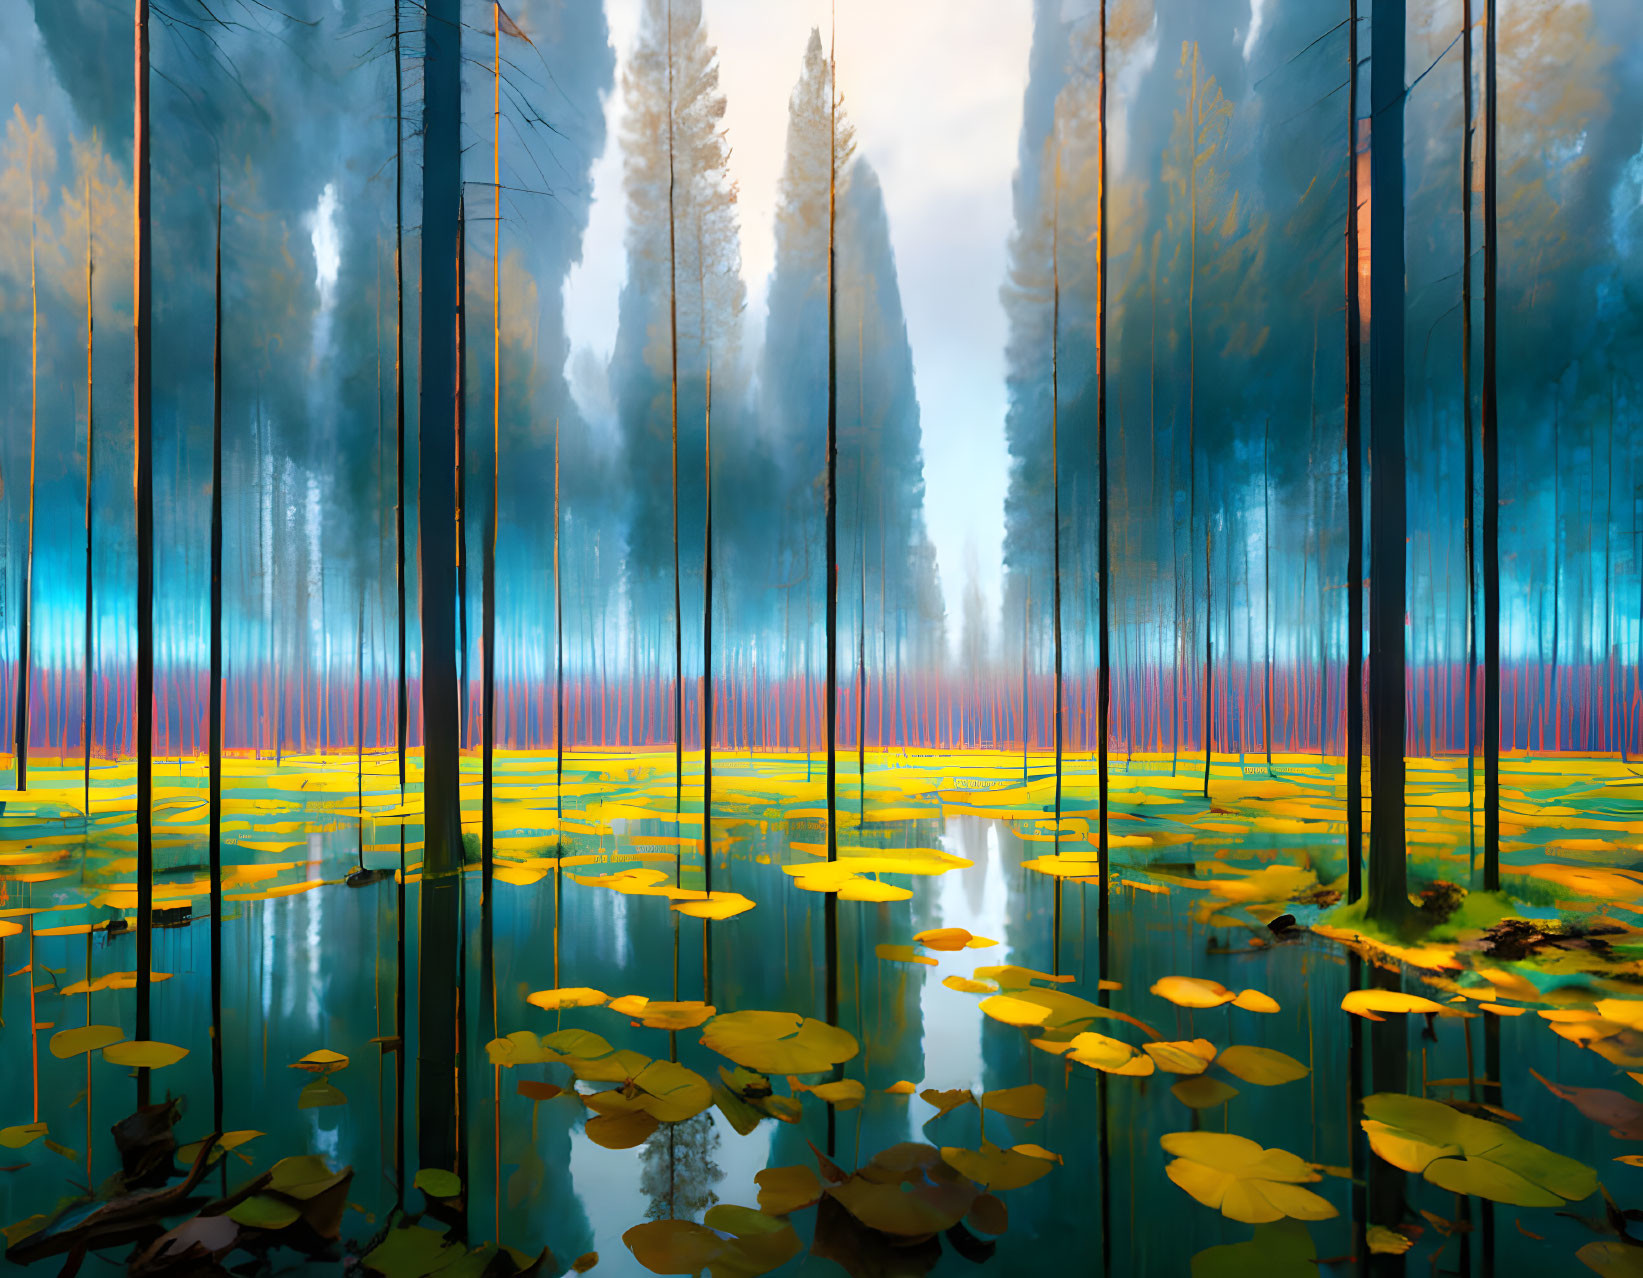 Enchanting forest landscape with reflective water and towering trees